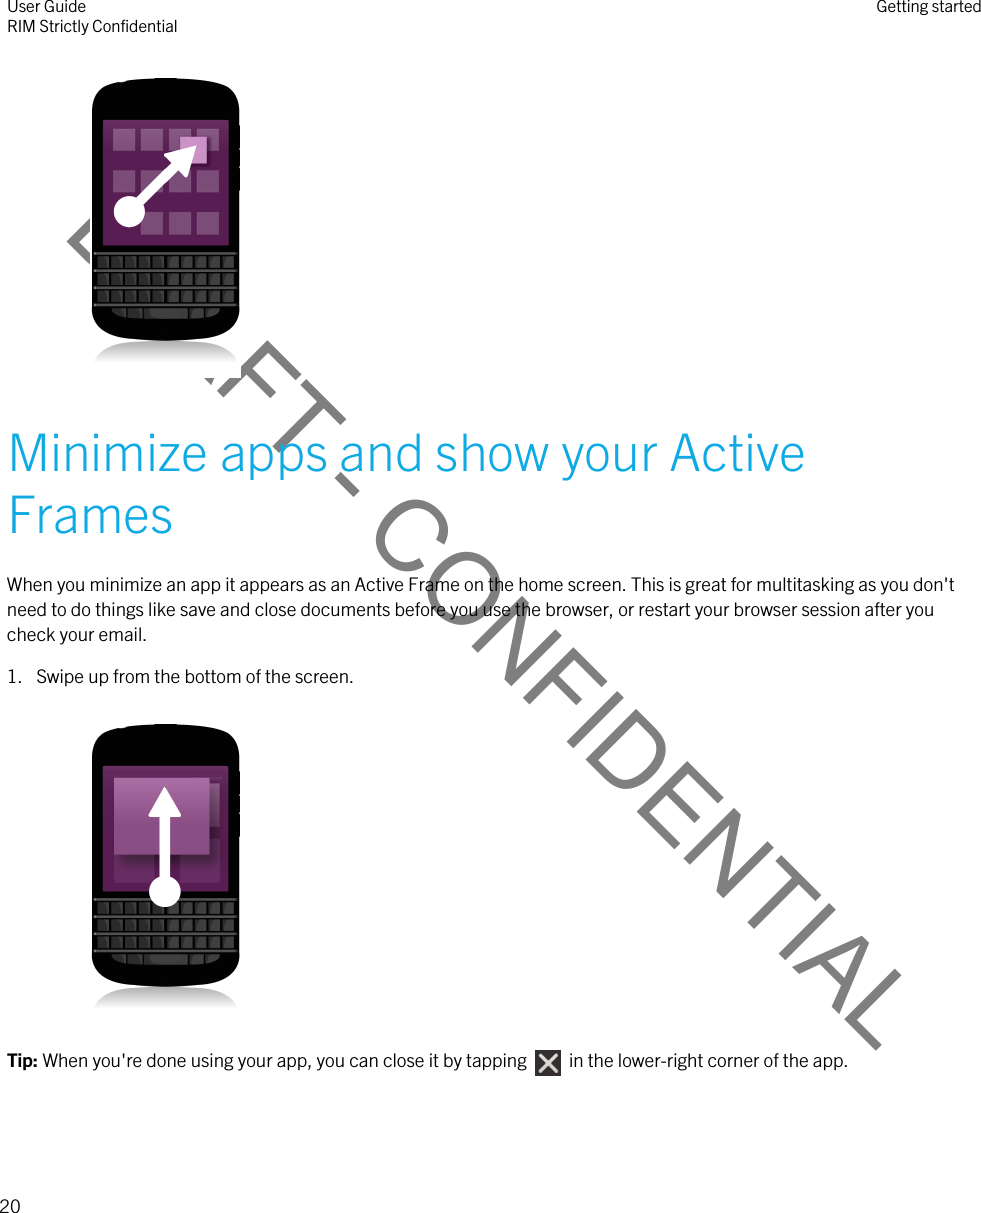 DRAFT - CONFIDENTIAL Minimize apps and show your Active FramesWhen you minimize an app it appears as an Active Frame on the home screen. This is great for multitasking as you don&apos;t need to do things like save and close documents before you use the browser, or restart your browser session after you check your email.1. Swipe up from the bottom of the screen. Tip: When you&apos;re done using your app, you can close it by tapping    in the lower-right corner of the app.User GuideRIM Strictly Confidential Getting started20 